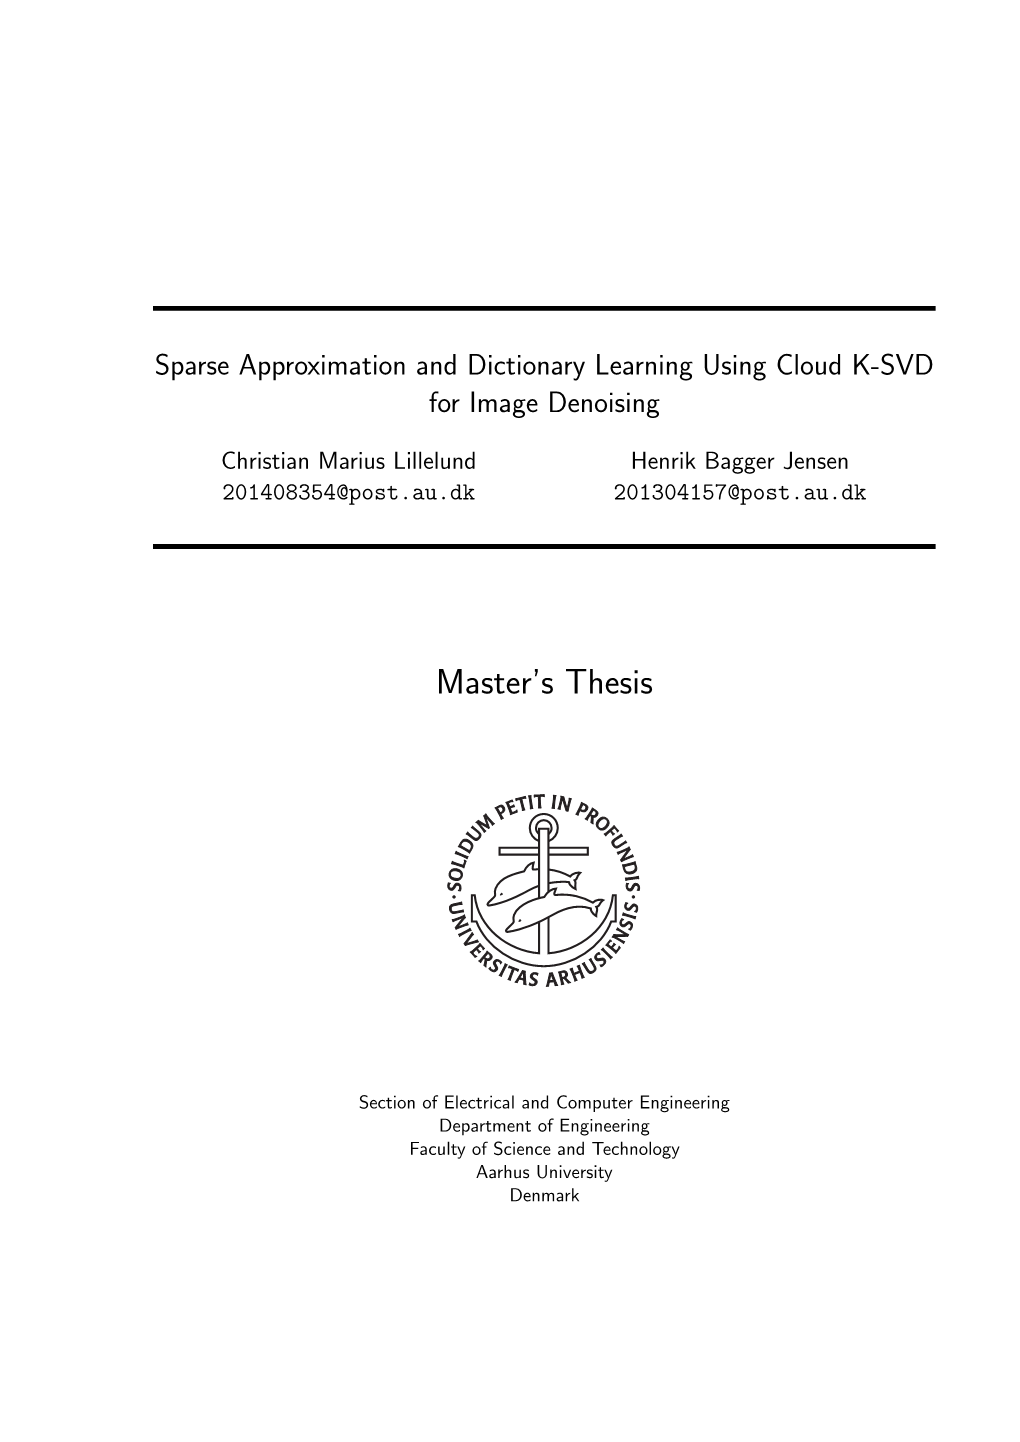 Sparse Approximation and Dictionary Learning Using Cloud K-SVD for Image Denoising